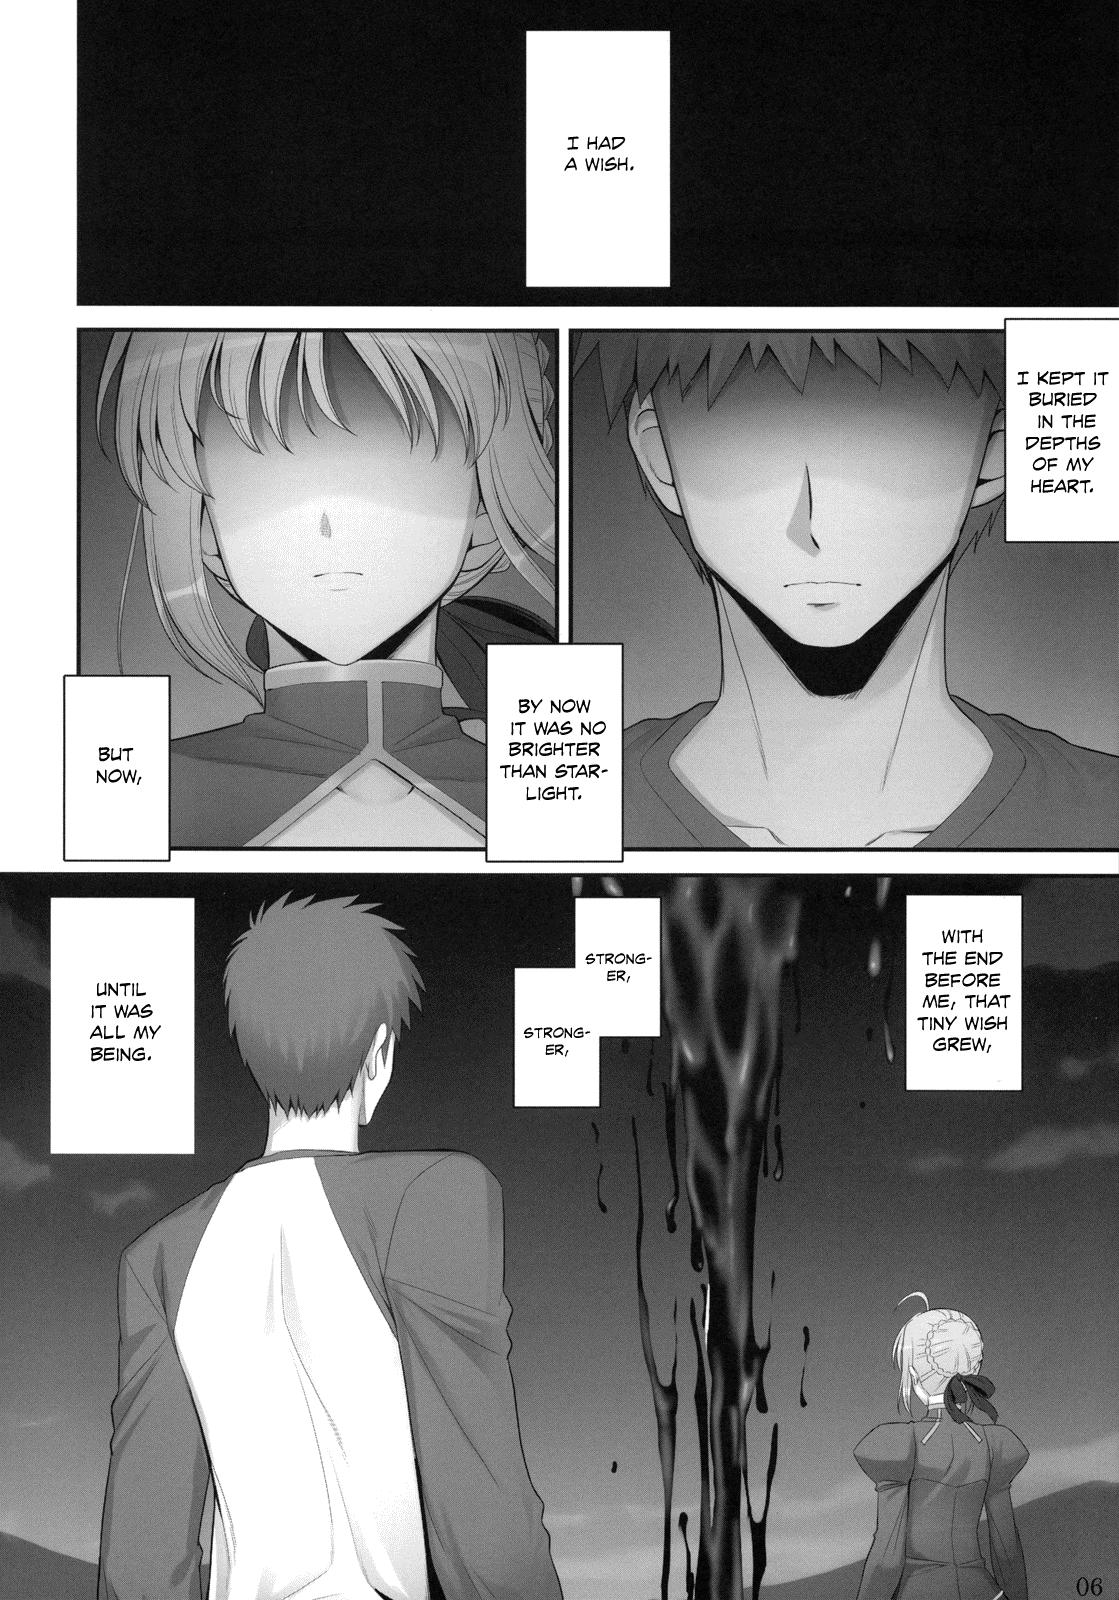 Online RE 09 - Fate stay night Juggs - Page 5